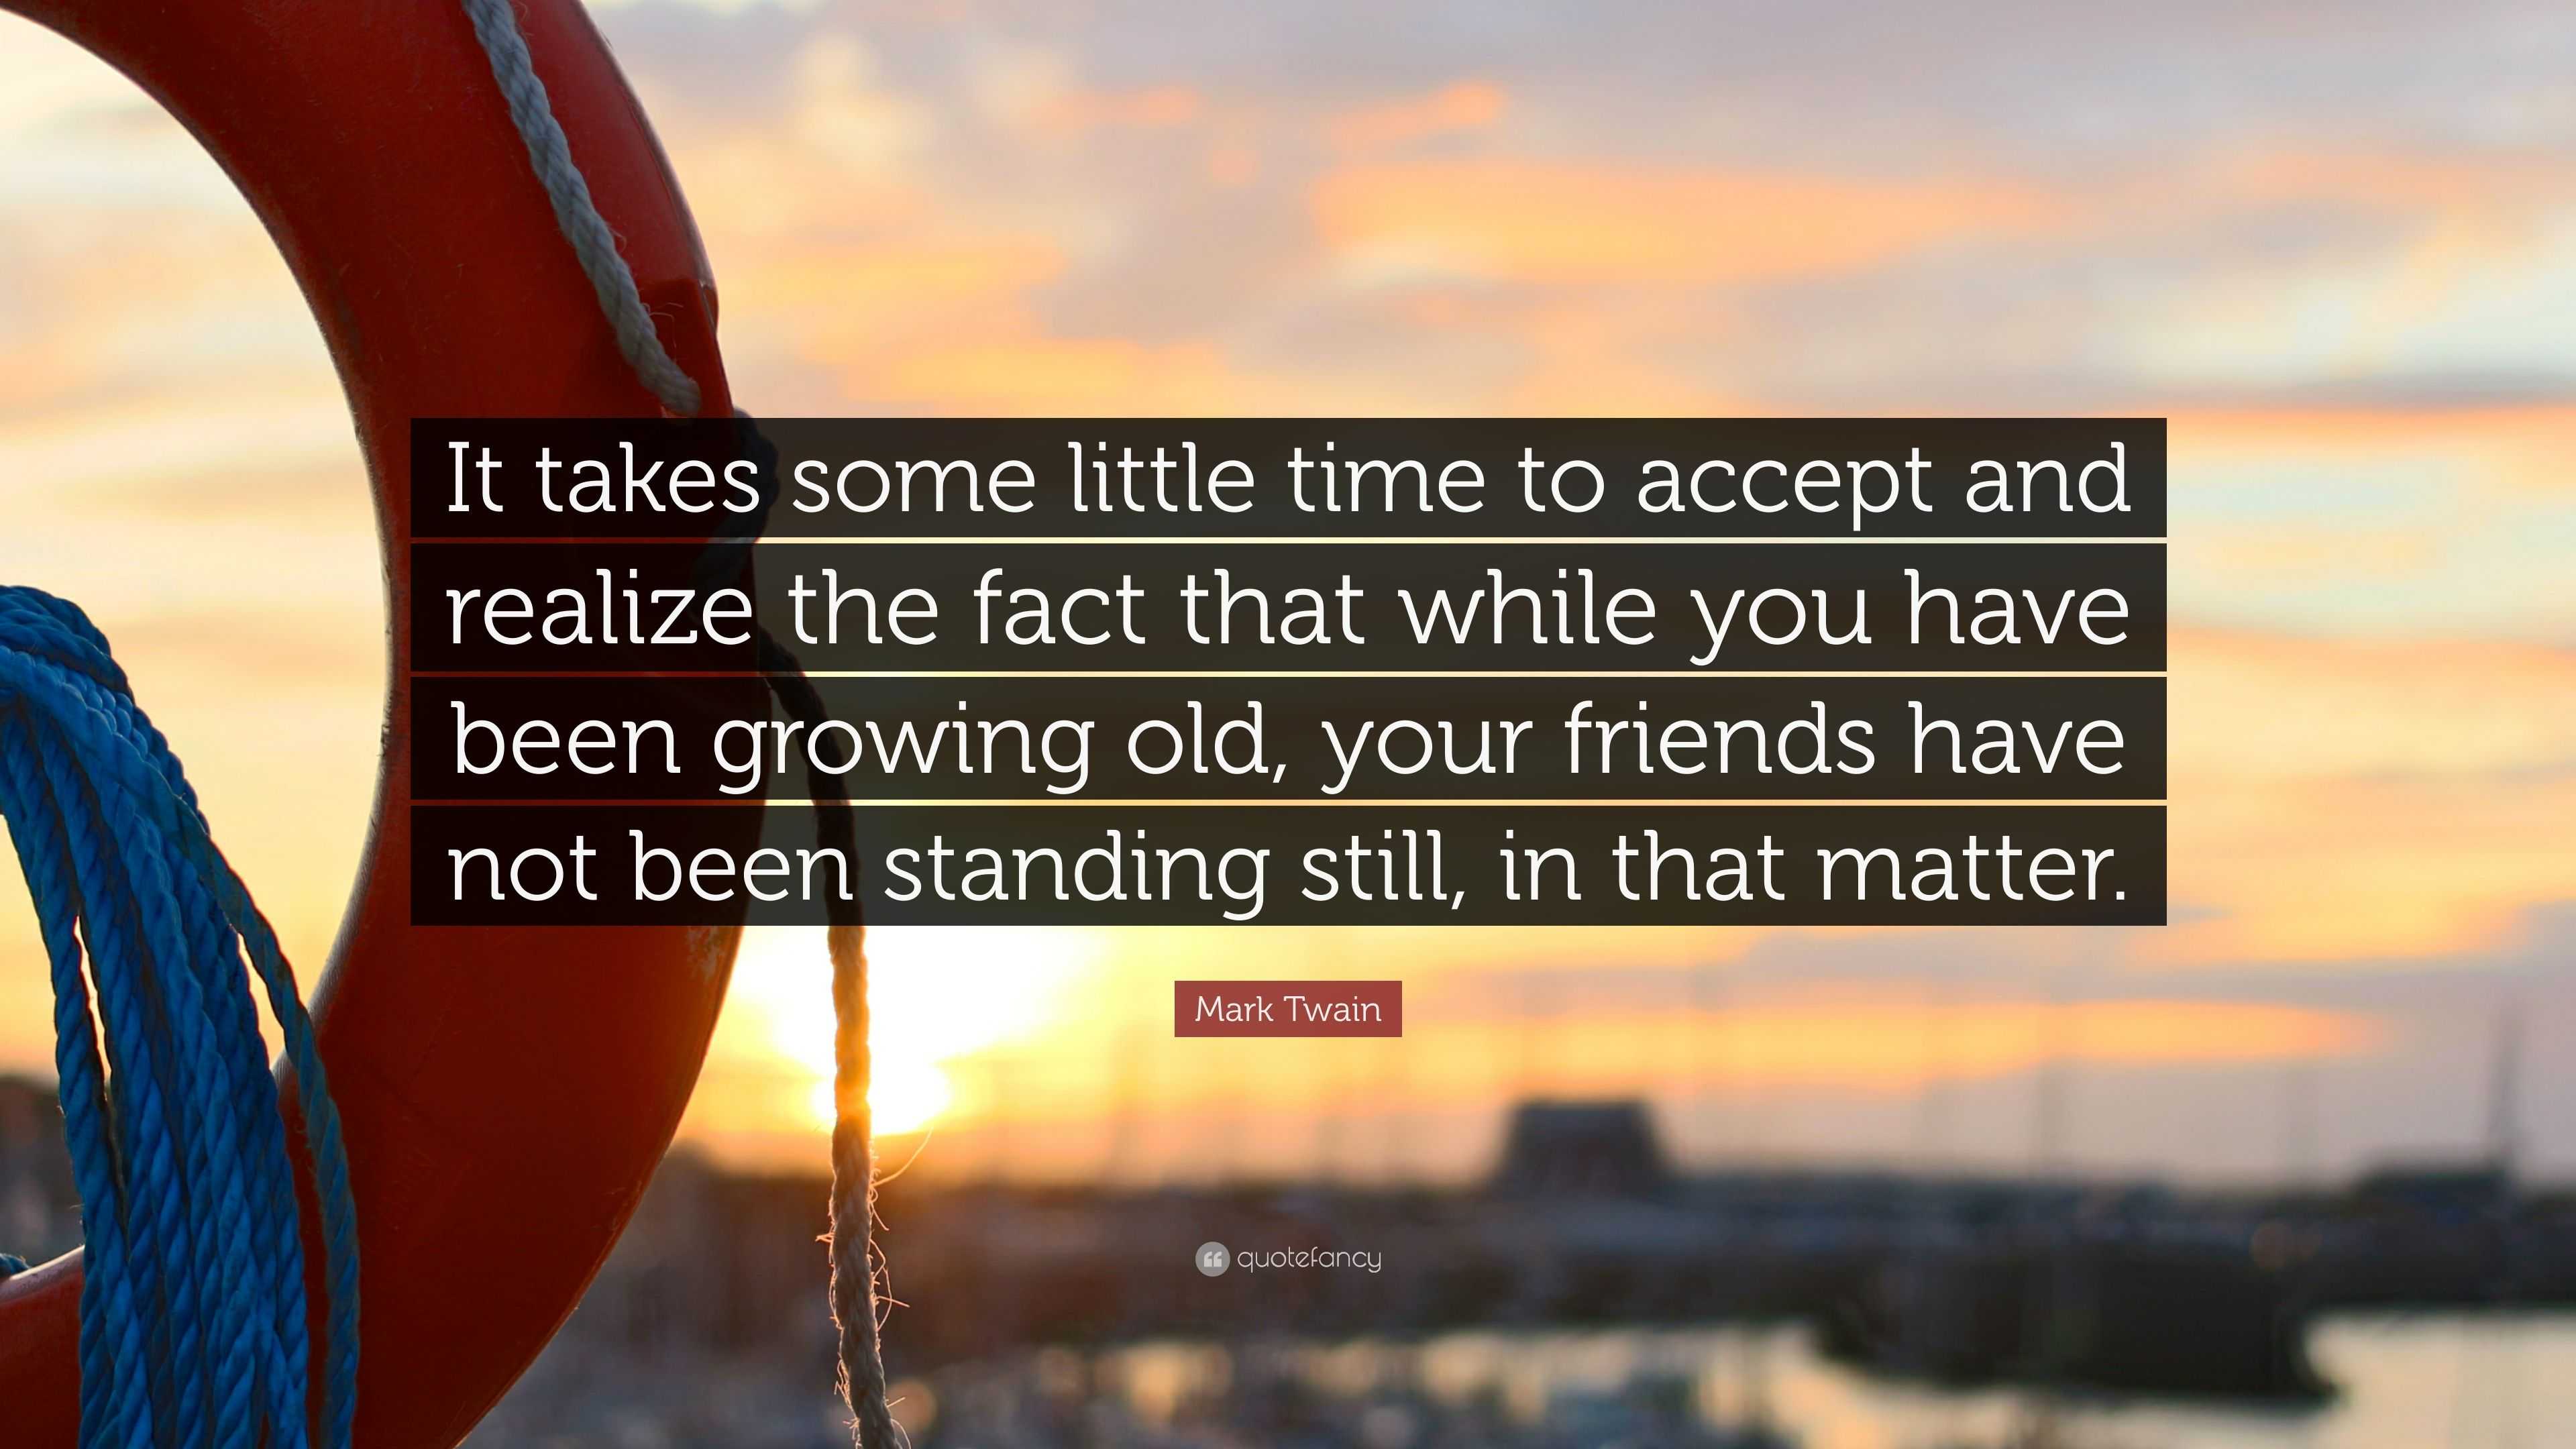 Mark Twain Quote “It takes some little time to accept and realize the fact